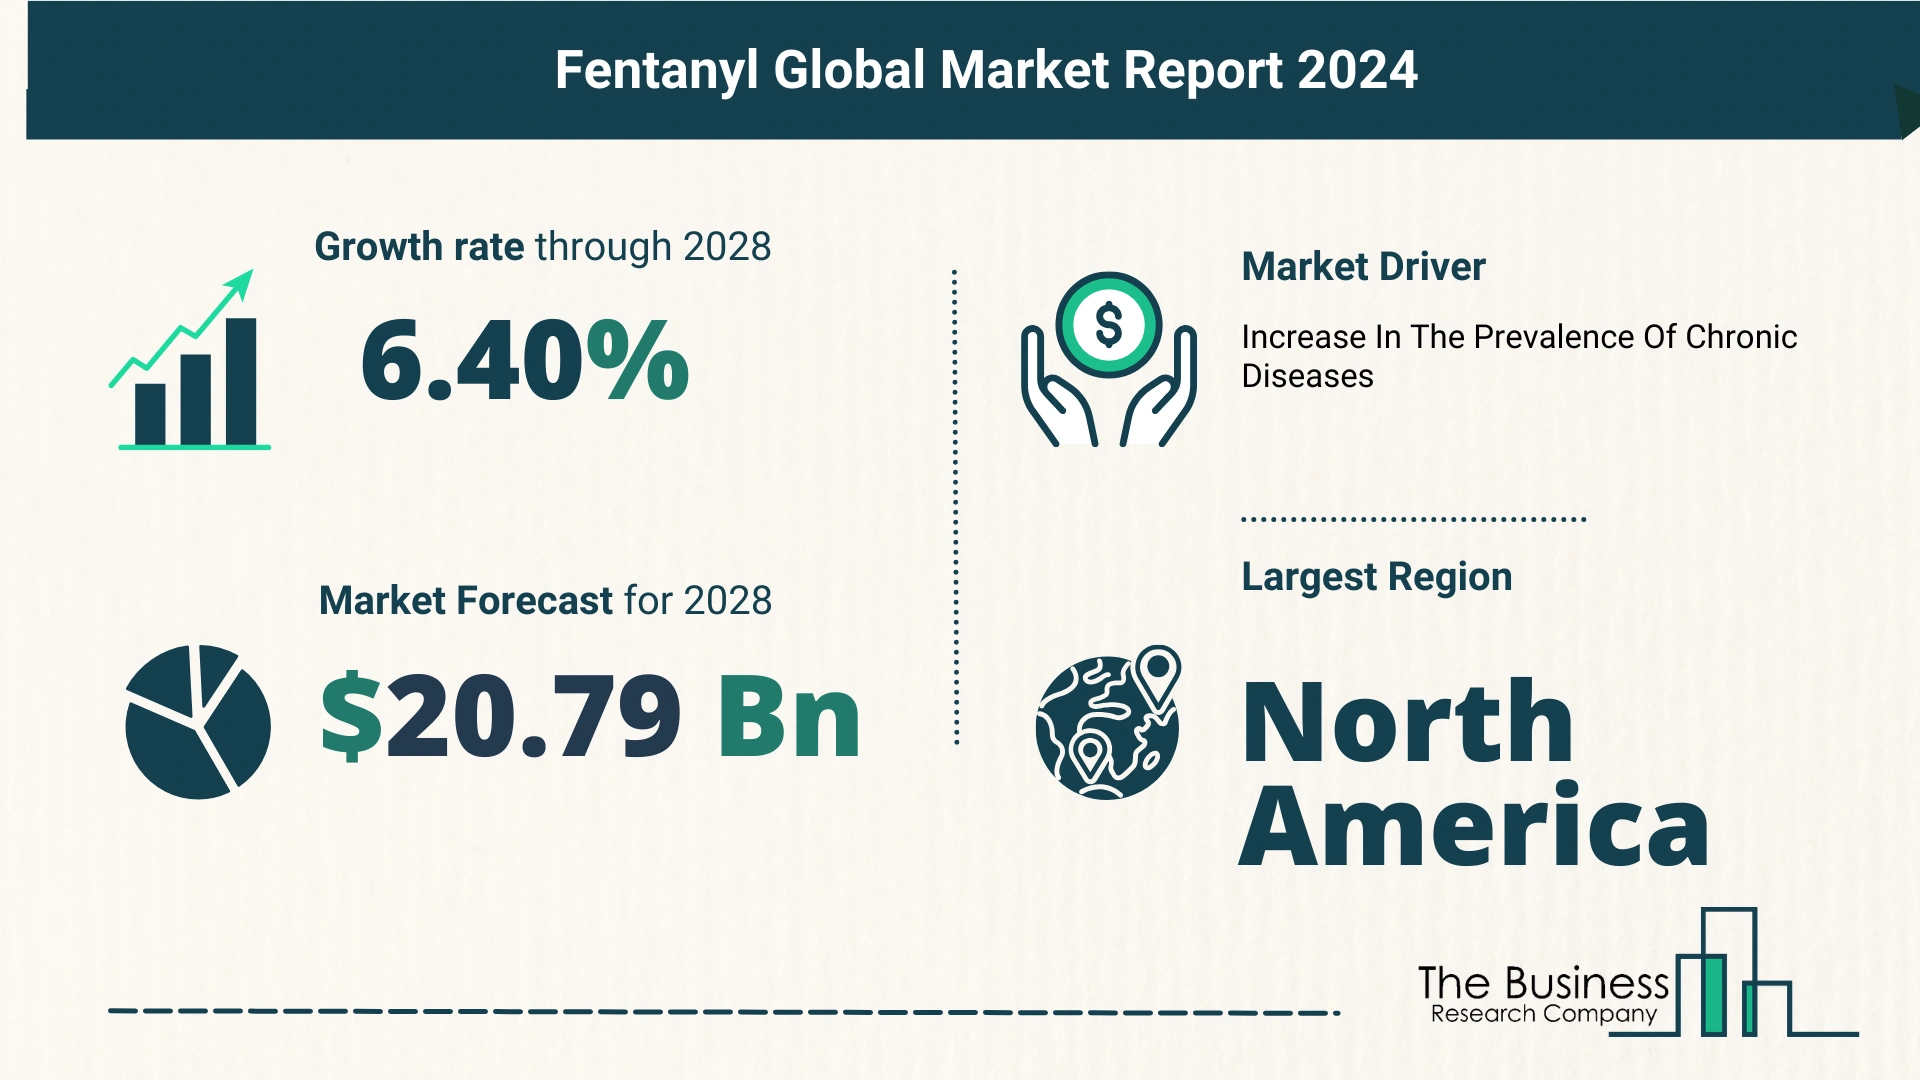 Global Fentanyl Market Analysis 2024: Size, Share, And Key Trends